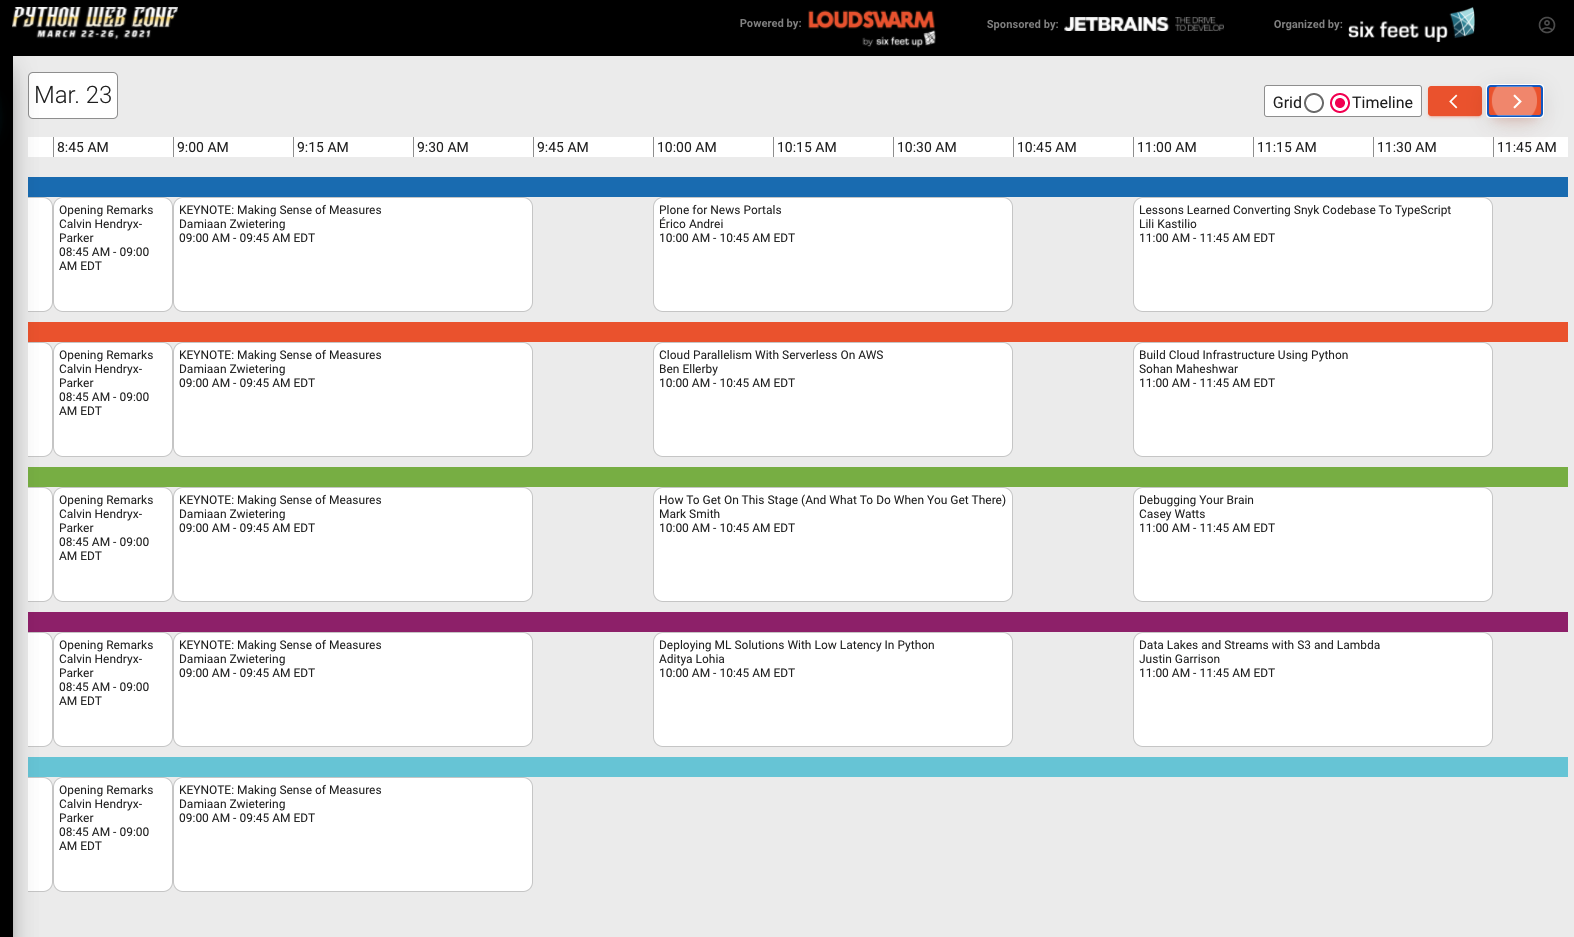 screenshot of a Loudswarm event's schedule in timeline mode